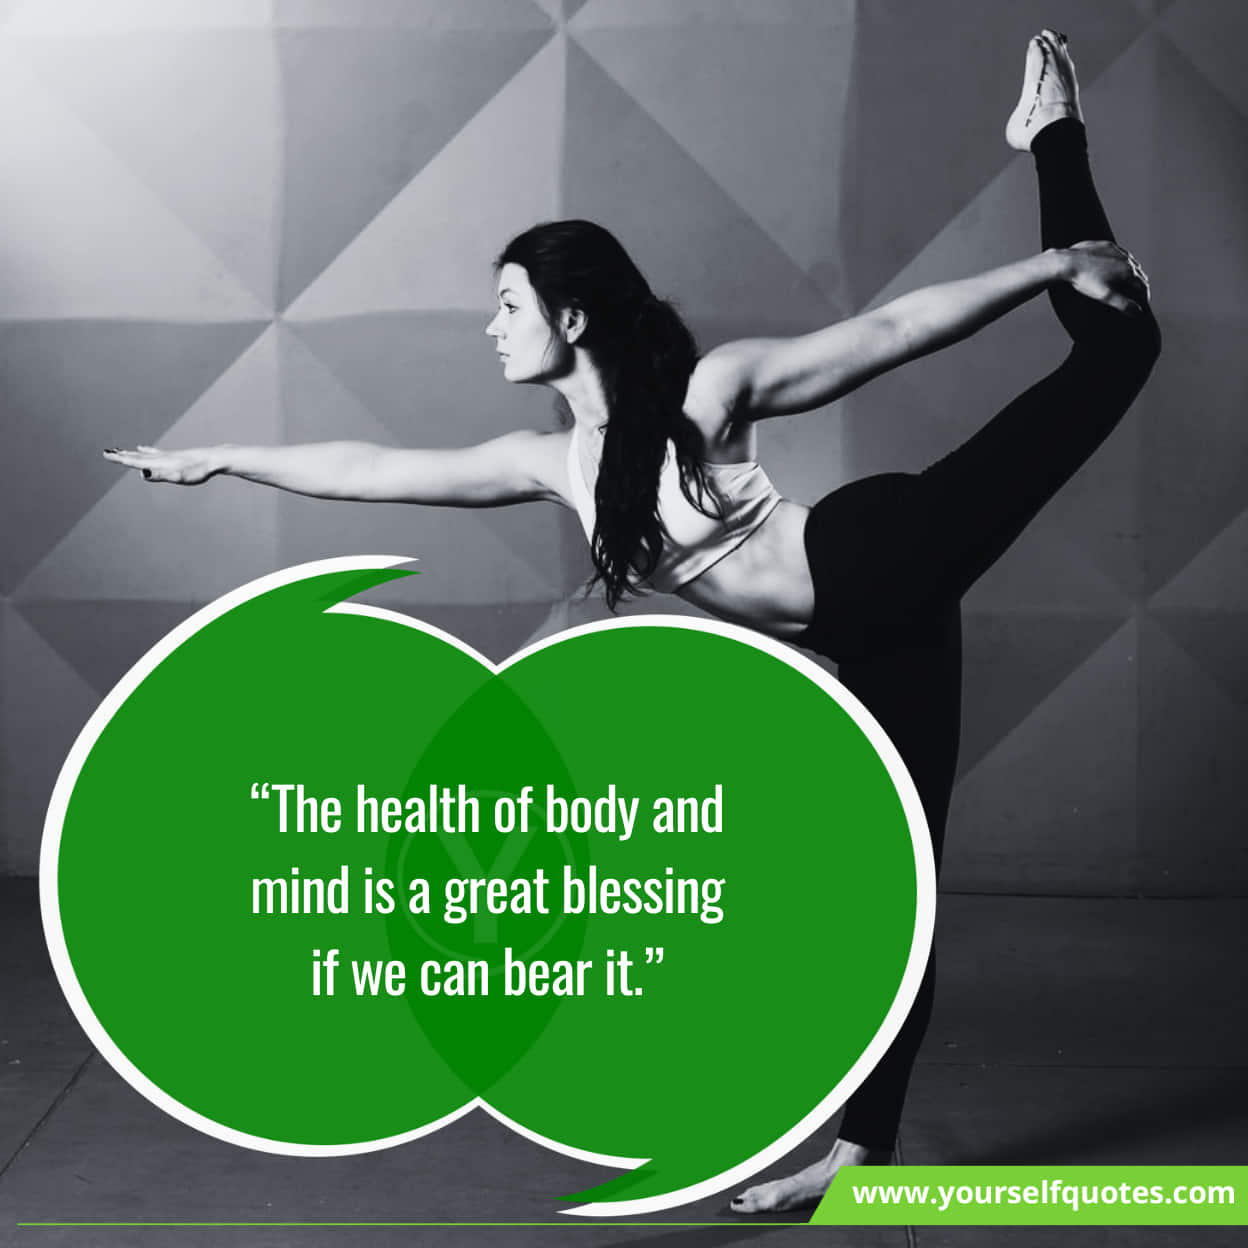 Best Famous Inspirational Quotes For Health